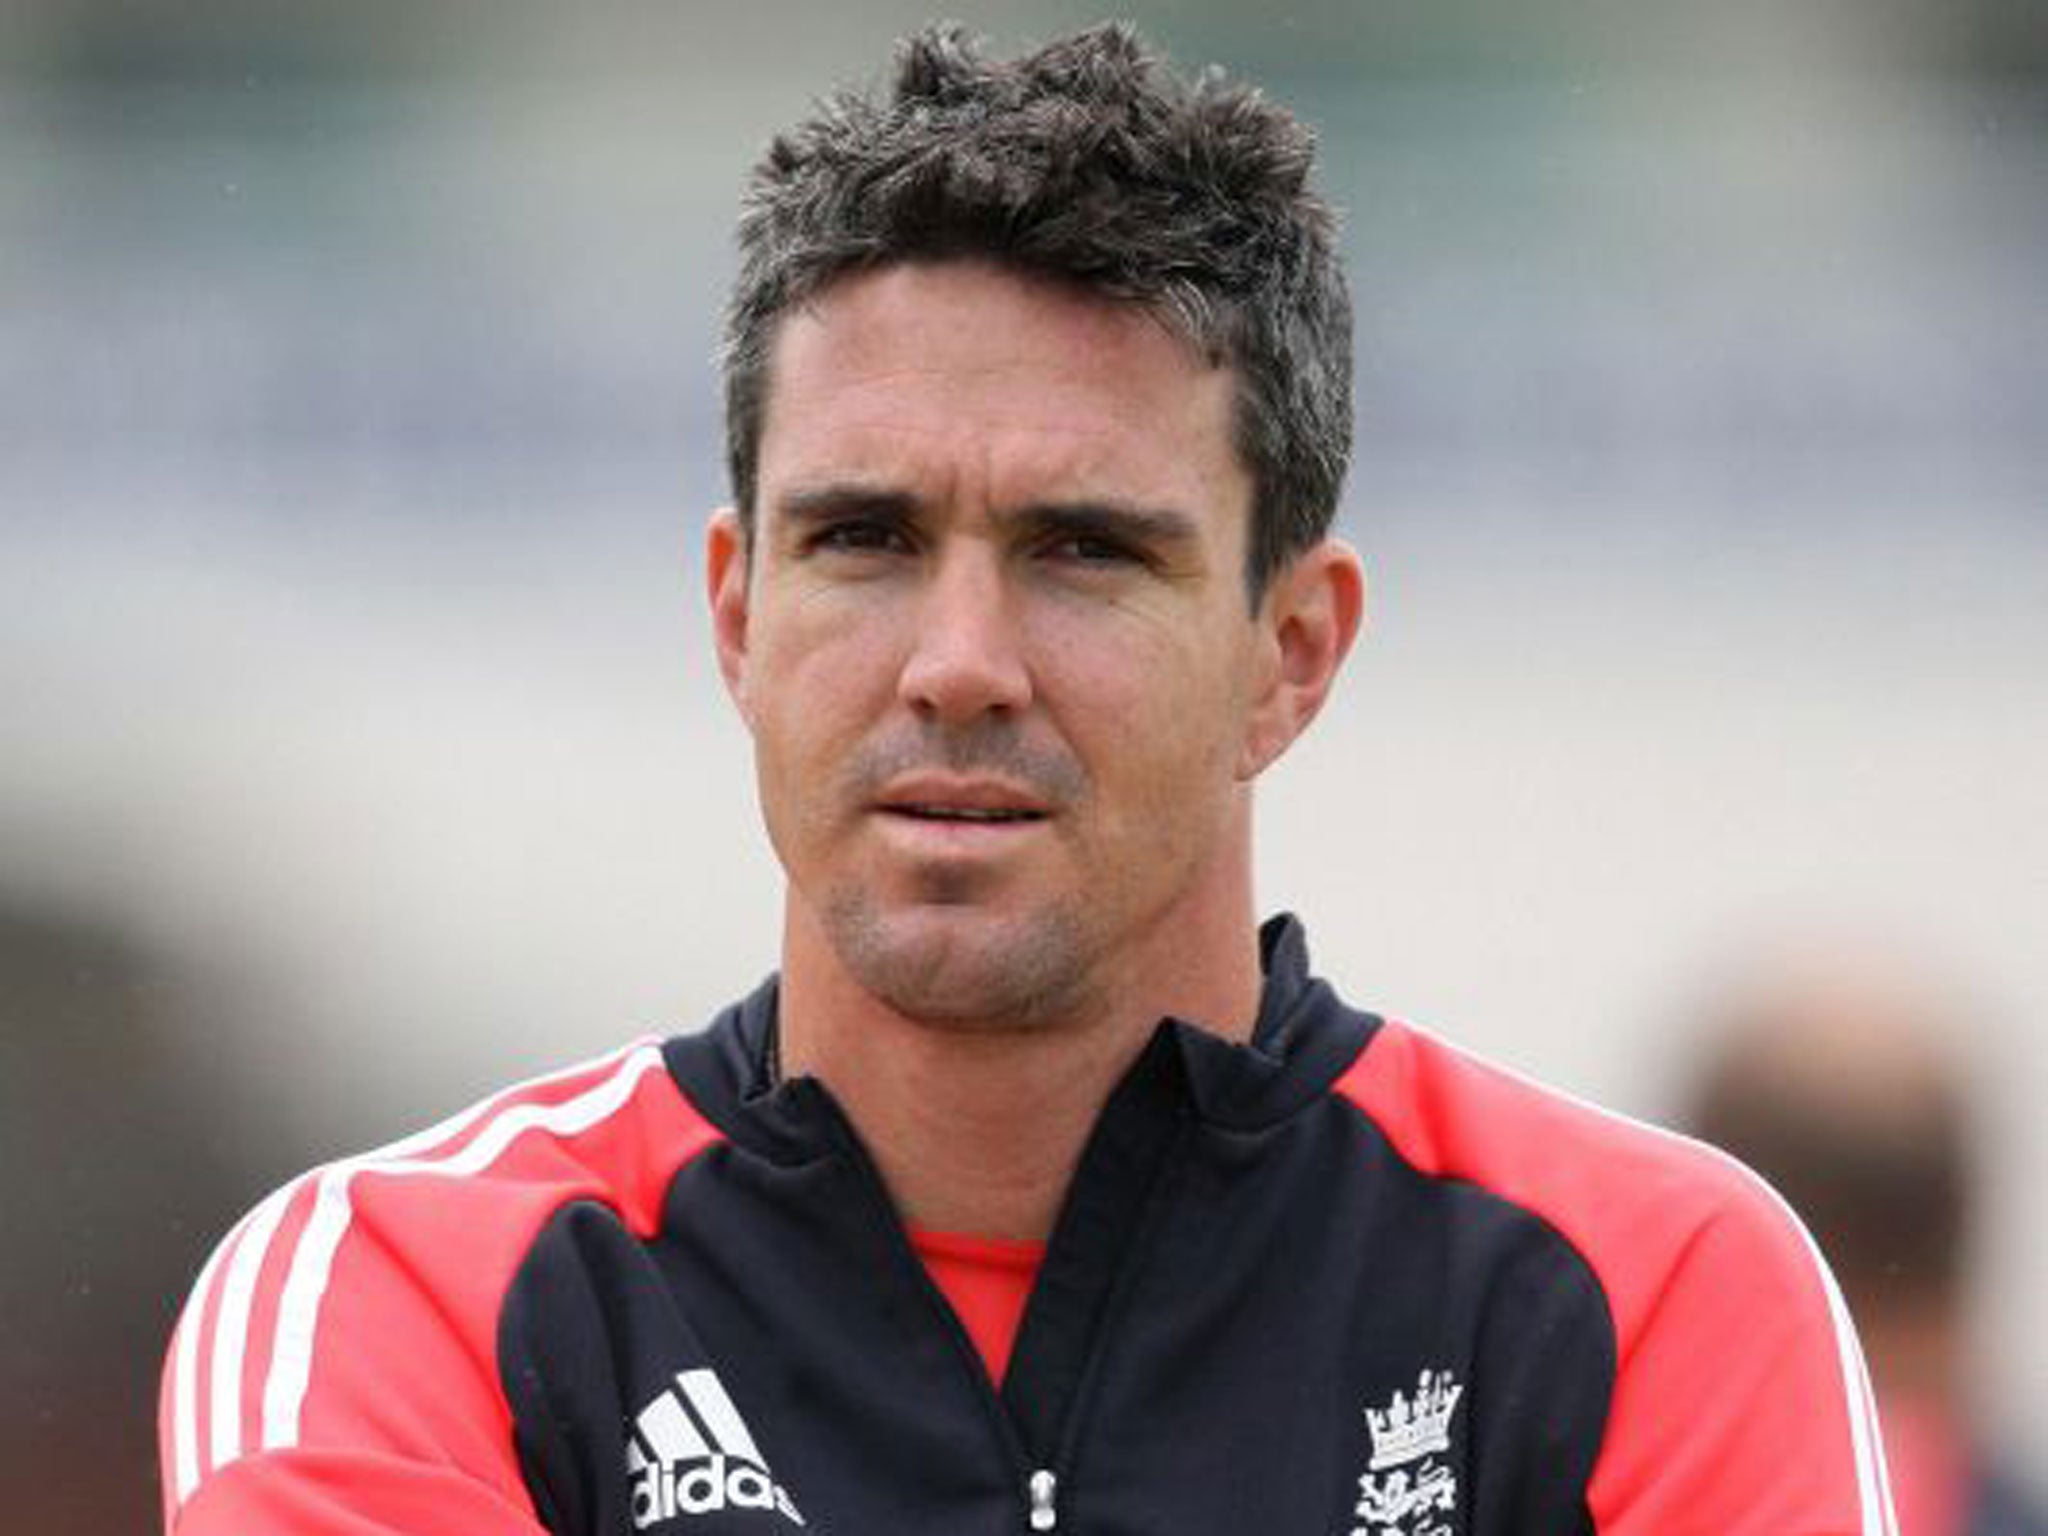 Kevin Pietersen’s wish for more free time has been granted